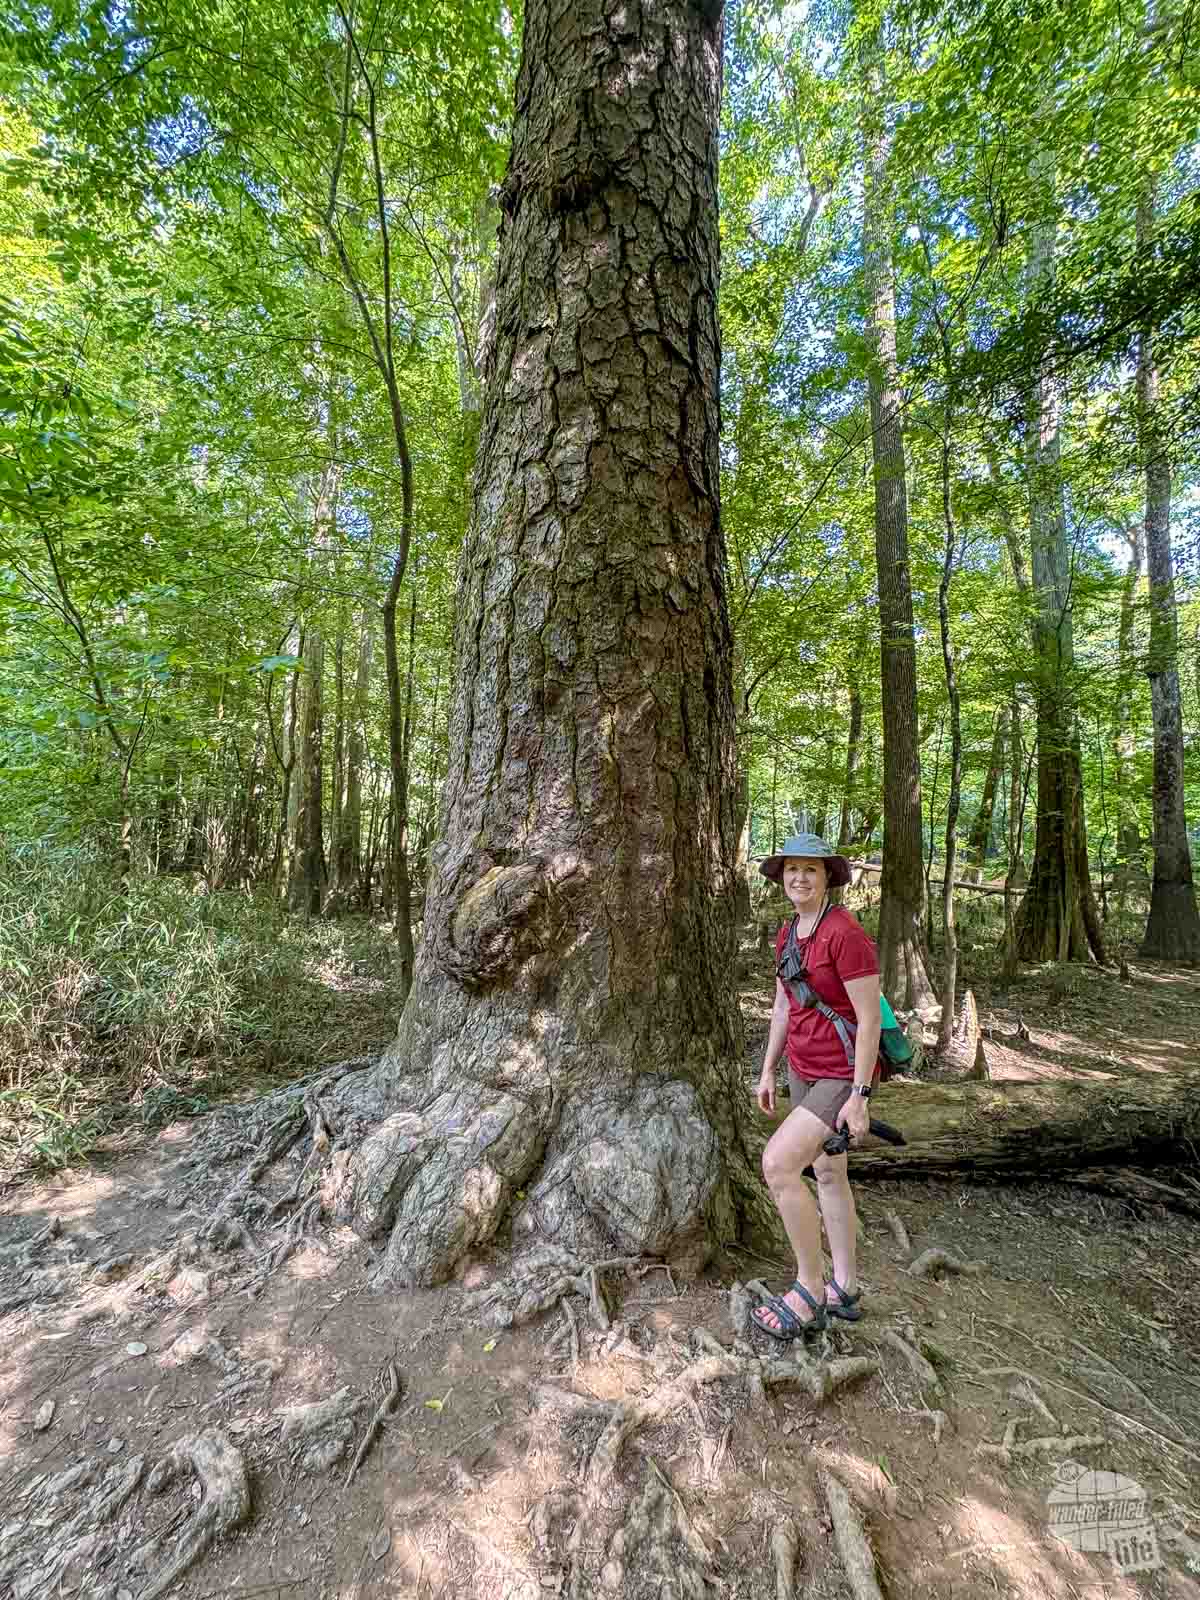 A woman standing next to a massive pine tree.